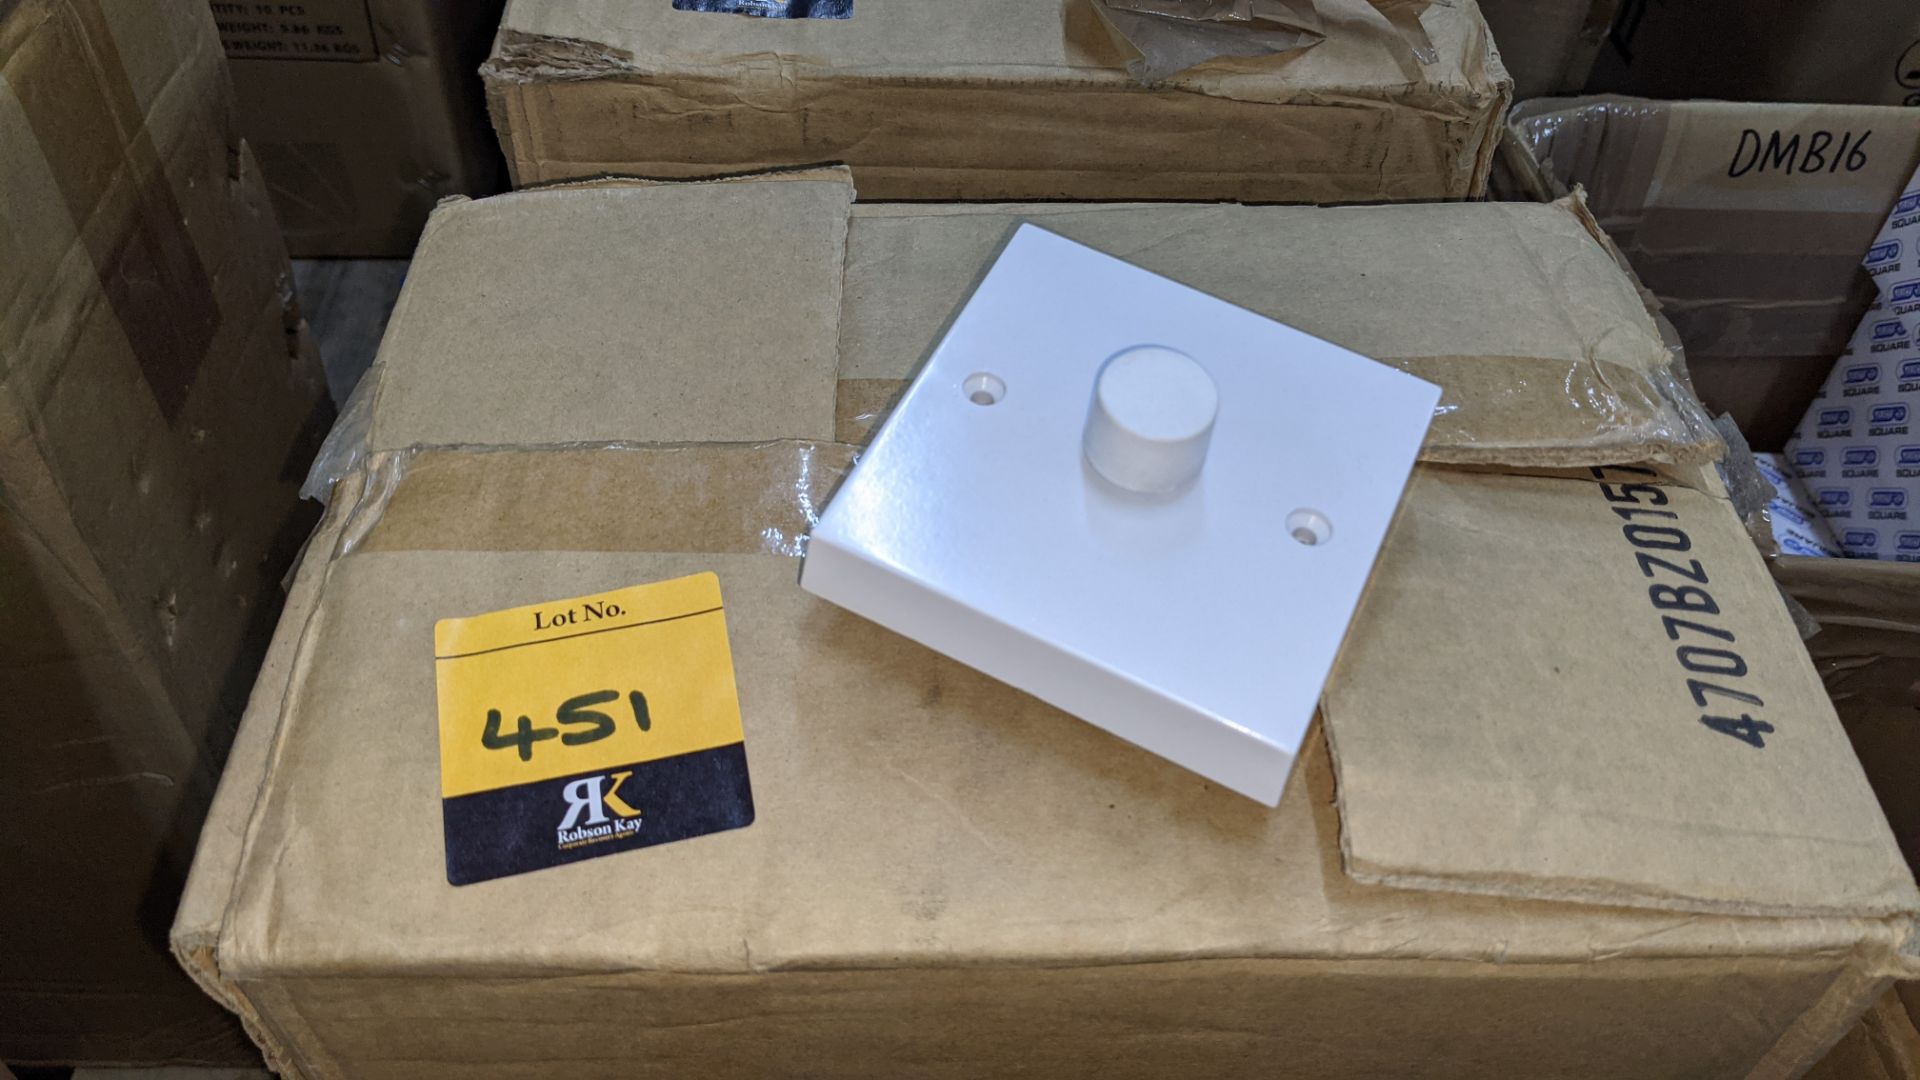 50 off dimmer switches - one carton - Image 4 of 4